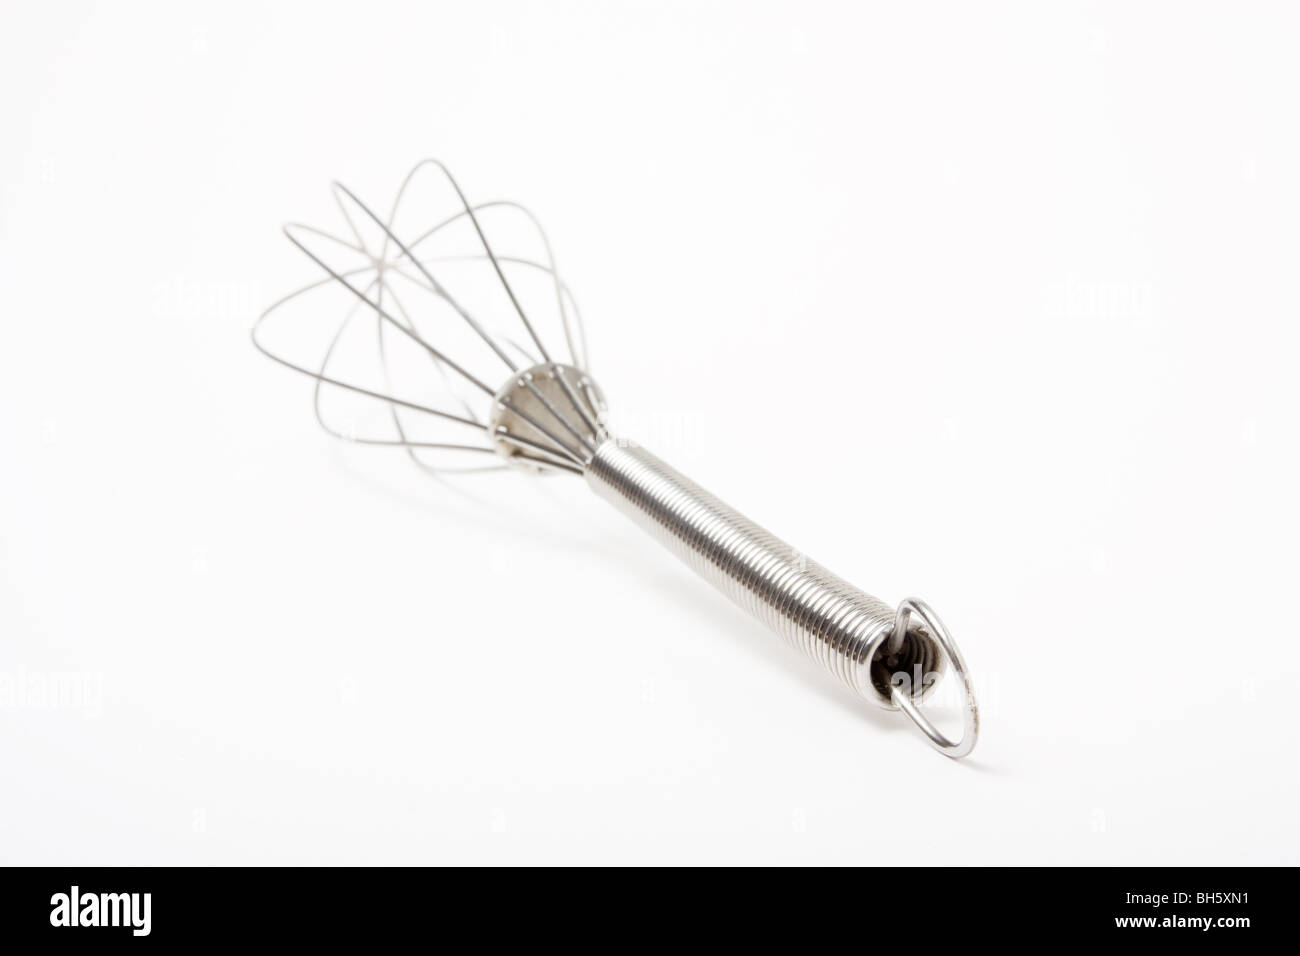 Stainless steel chef's whisk isolated against white background. Stock Photo